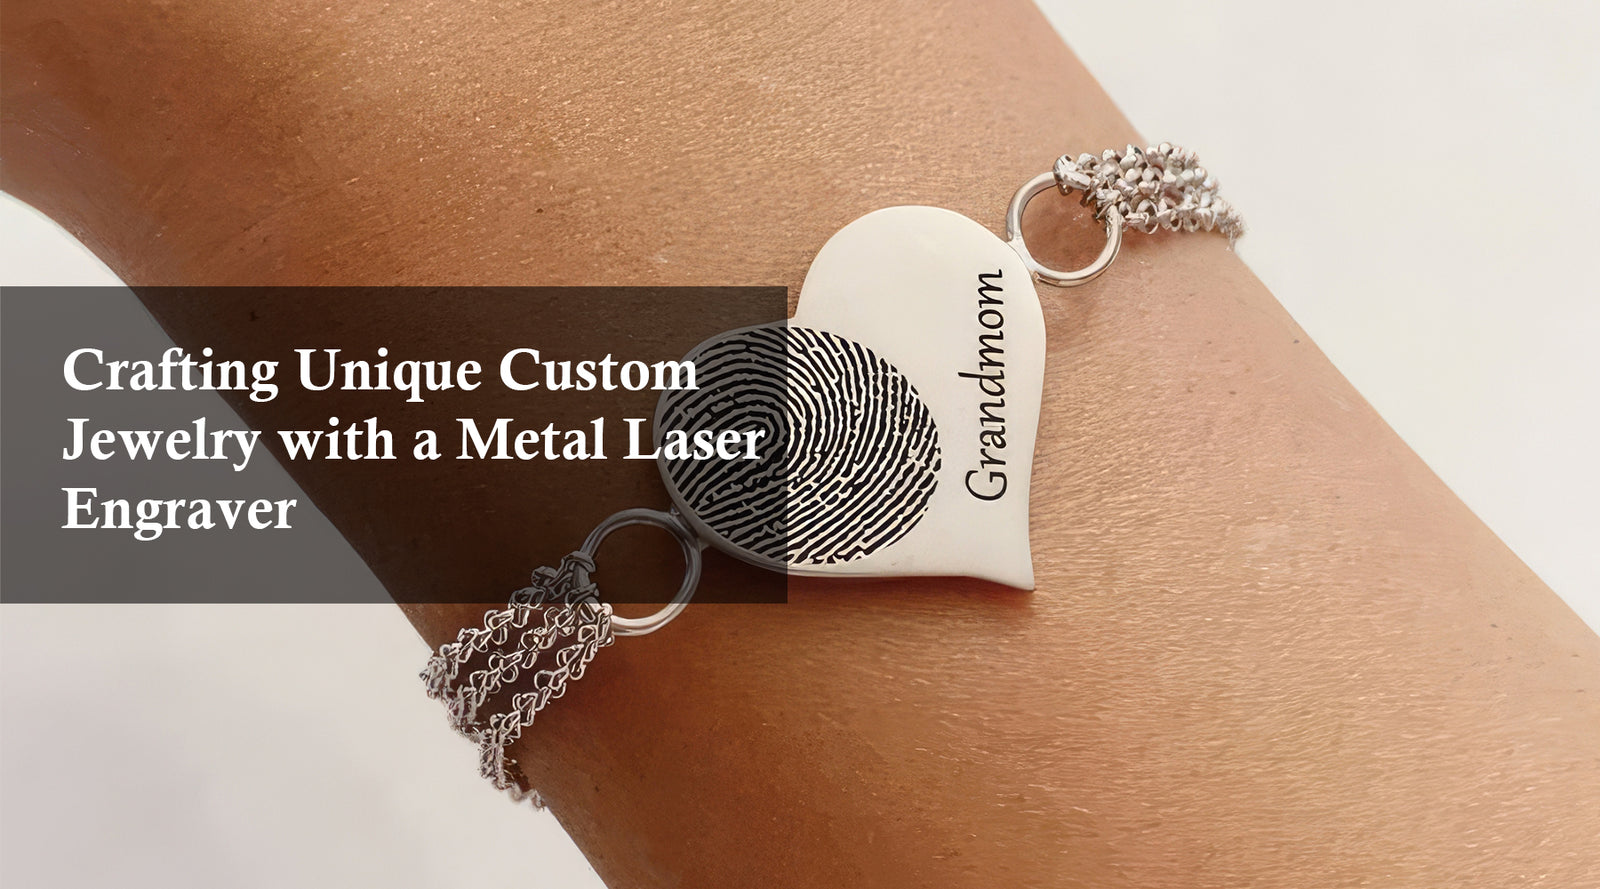 Crafting Unique Custom Jewelry with a Metal Laser Engraver